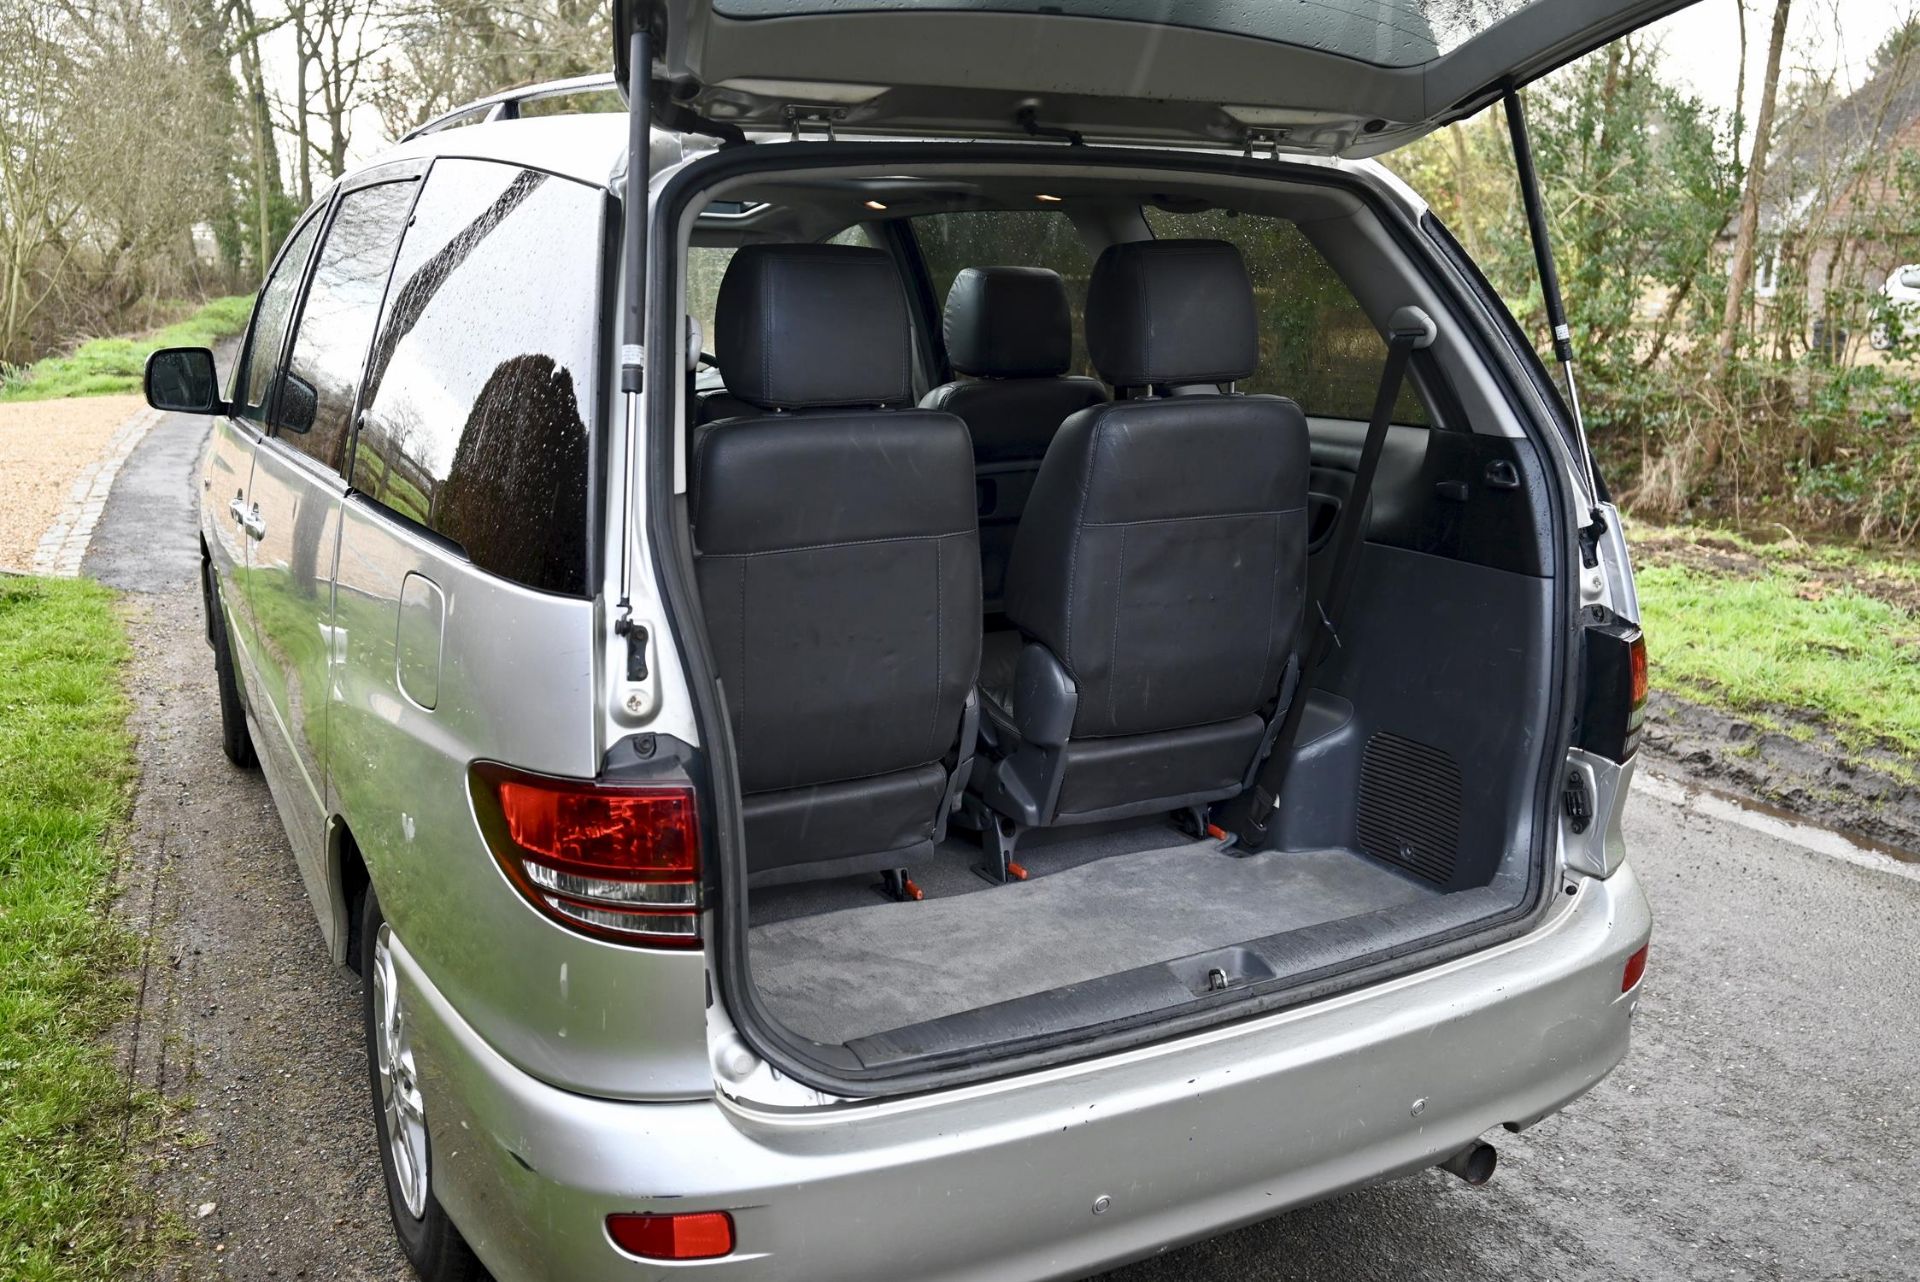 2006 Toyota Previa T-Spirit 2.4 VVTi Auto 7-Seater. Registration number LC06 LYK. - Image 8 of 11